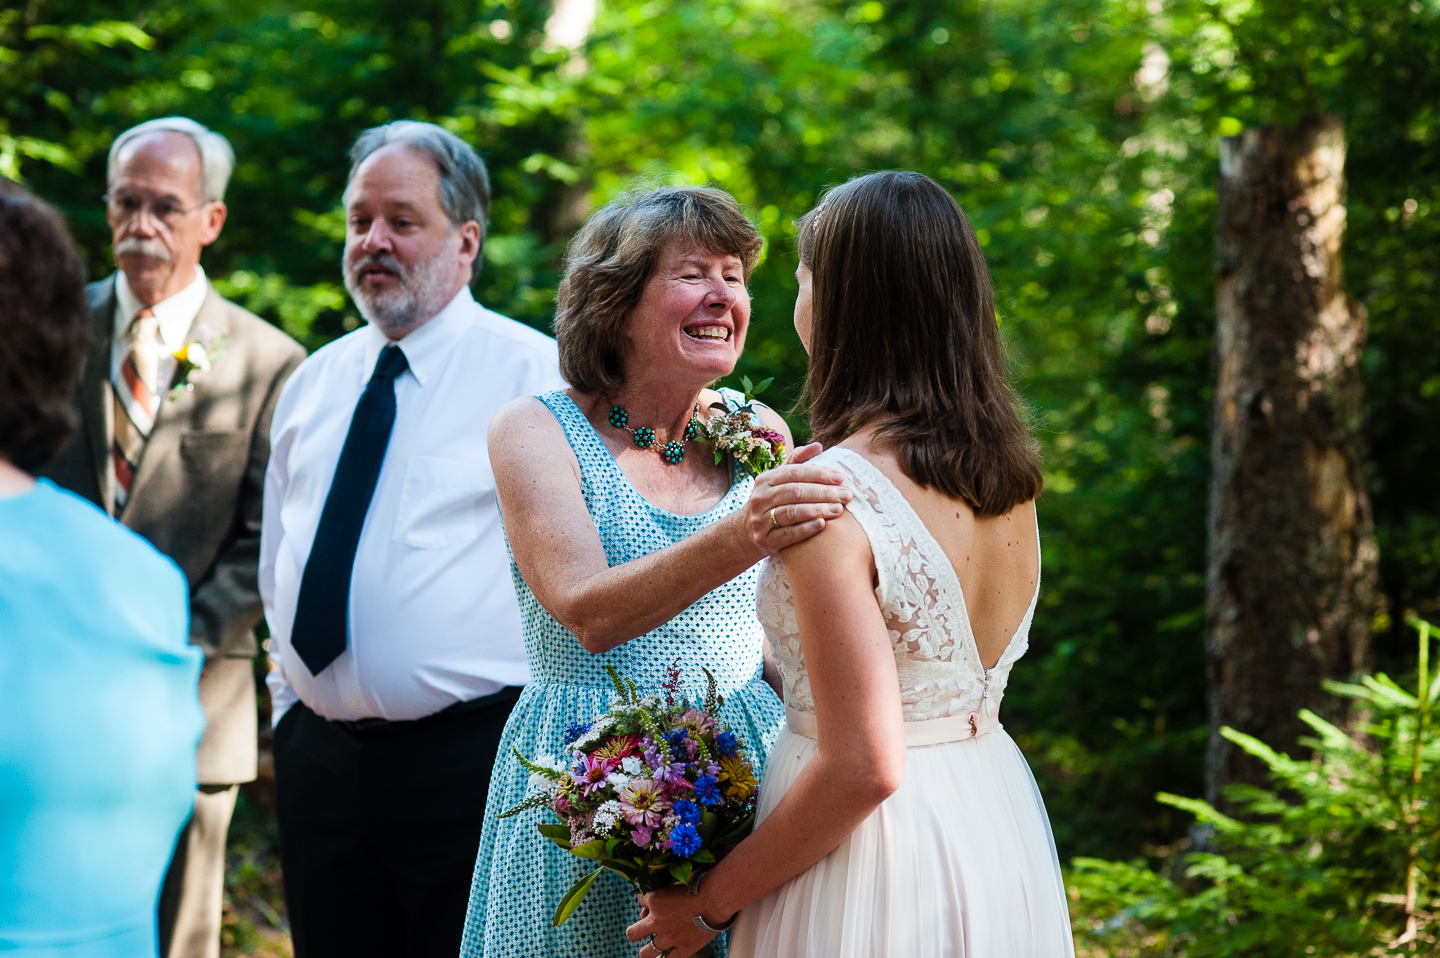 brides mom congratulates thee newly married bride and groom